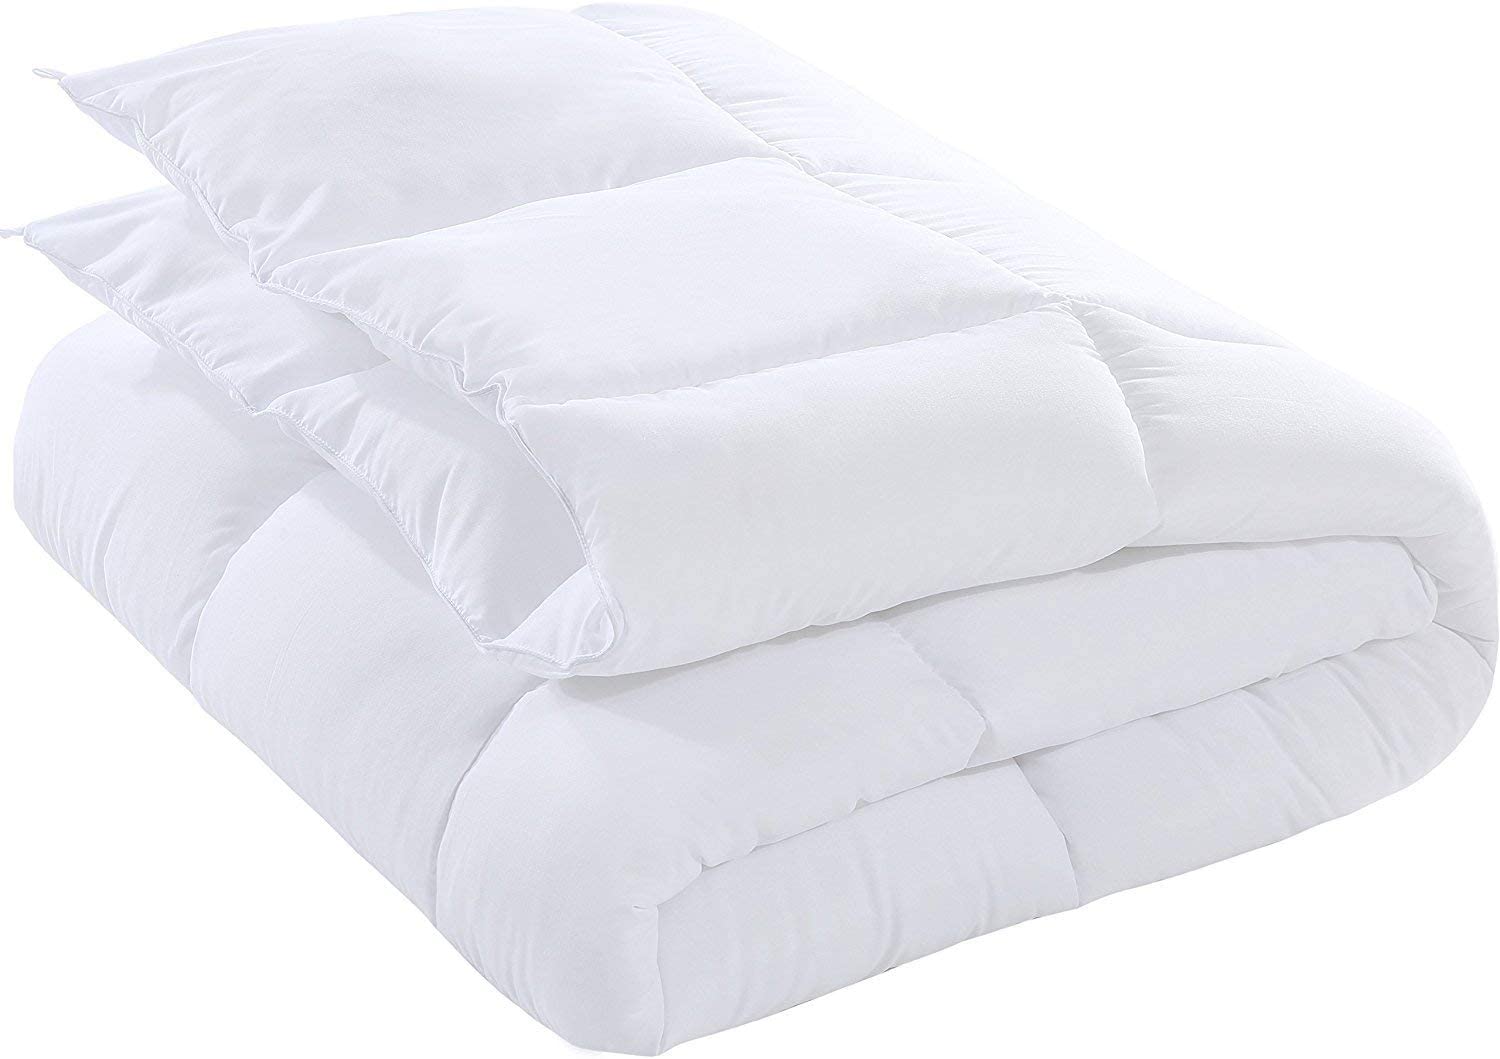 Utopia Bedding Premium Waterproof White Terry Mattress Protector with All  Season Box Stitched Comforter - Pack of 2 (Queen, White) – Plush  Siliconized